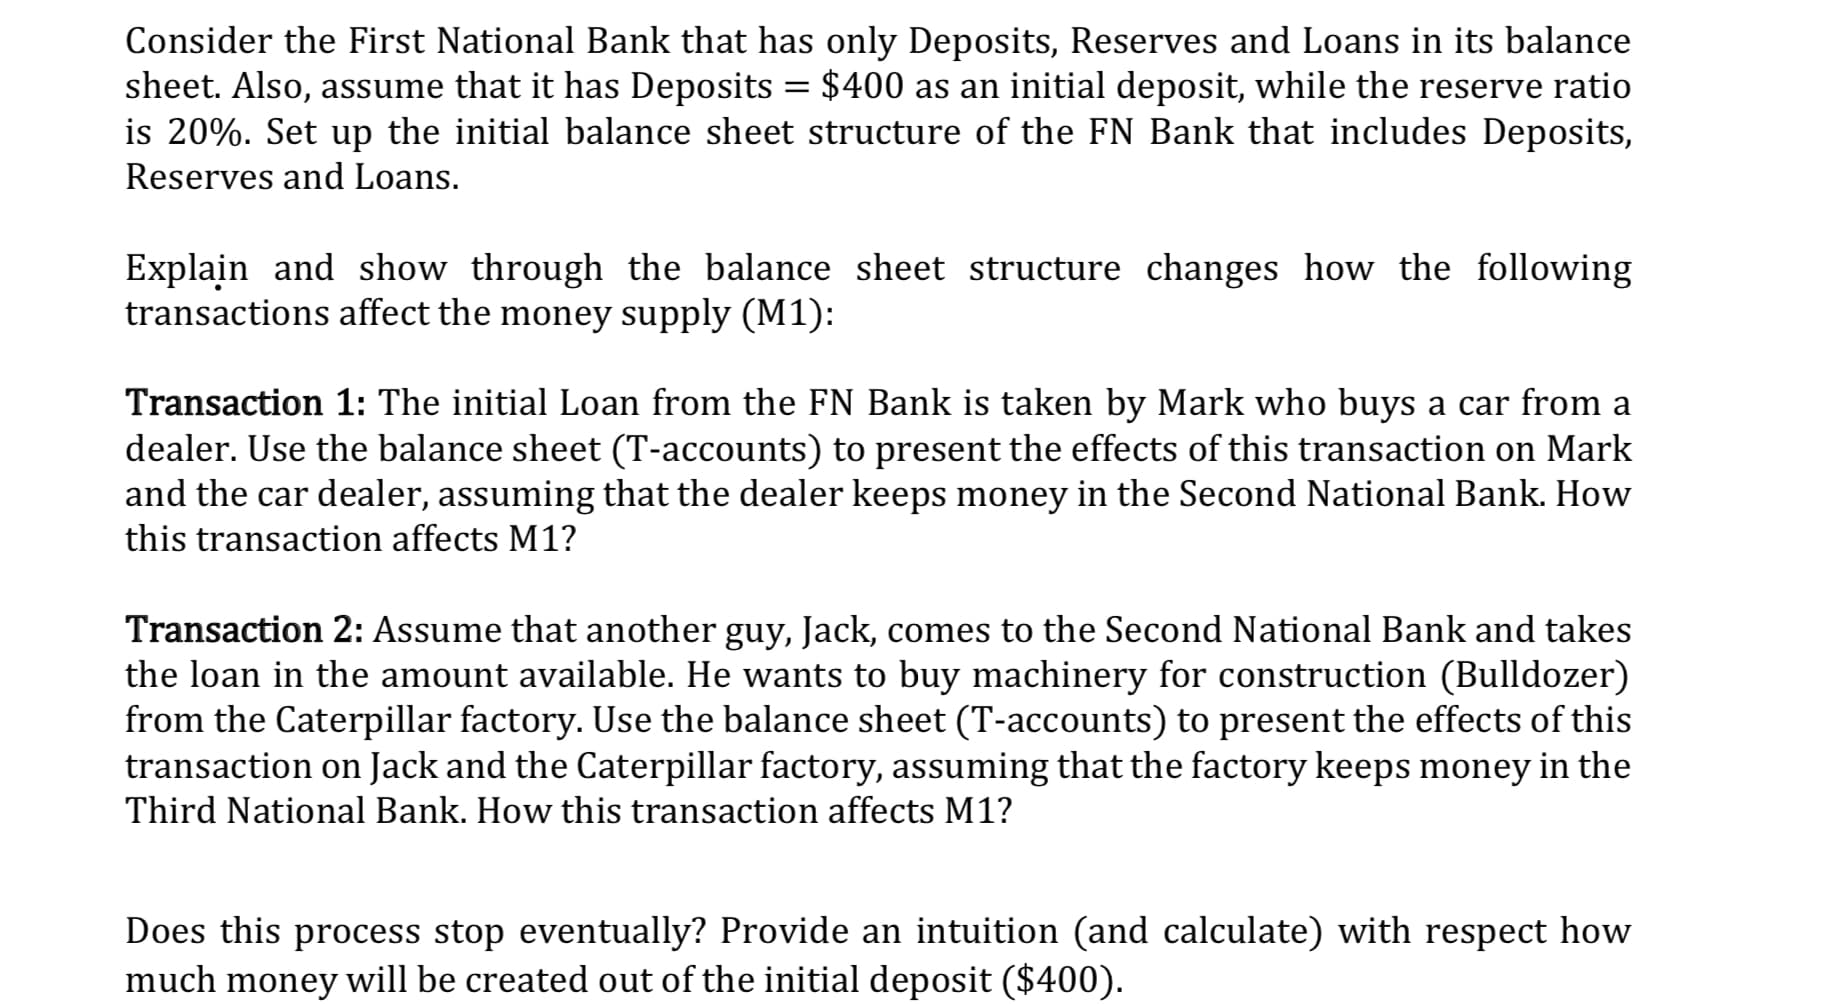 Explain and show through the balance sheet structure changes how the following
transactions affect the money supply (M1):
Transaction 1: The initial Loan from the FN Bank is taken by Mark who buys a car from a
dealer. Use the balance sheet (T-accounts) to present the effects of this transaction on Mark
and the car dealer, assuming that the dealer keeps money in the Second National Bank. How
this transaction affects M1?
Transaction 2: Assume that another guy, Jack, comes to the Second National Bank and takes
the loan in the amount available. He wants to buy machinery for construction (Bulldozer)
from the Caterpillar factory. Use the balance sheet (T-accounts) to present the effects of this
transaction on Jack and the Caterpillar factory, assuming that the factory keeps money in the
Third National Bank. How this transaction affects M1?
Does this process stop eventually? Provide an intuition (and calculate) with respect how
much money will be created out of the initial deposit ($400).
